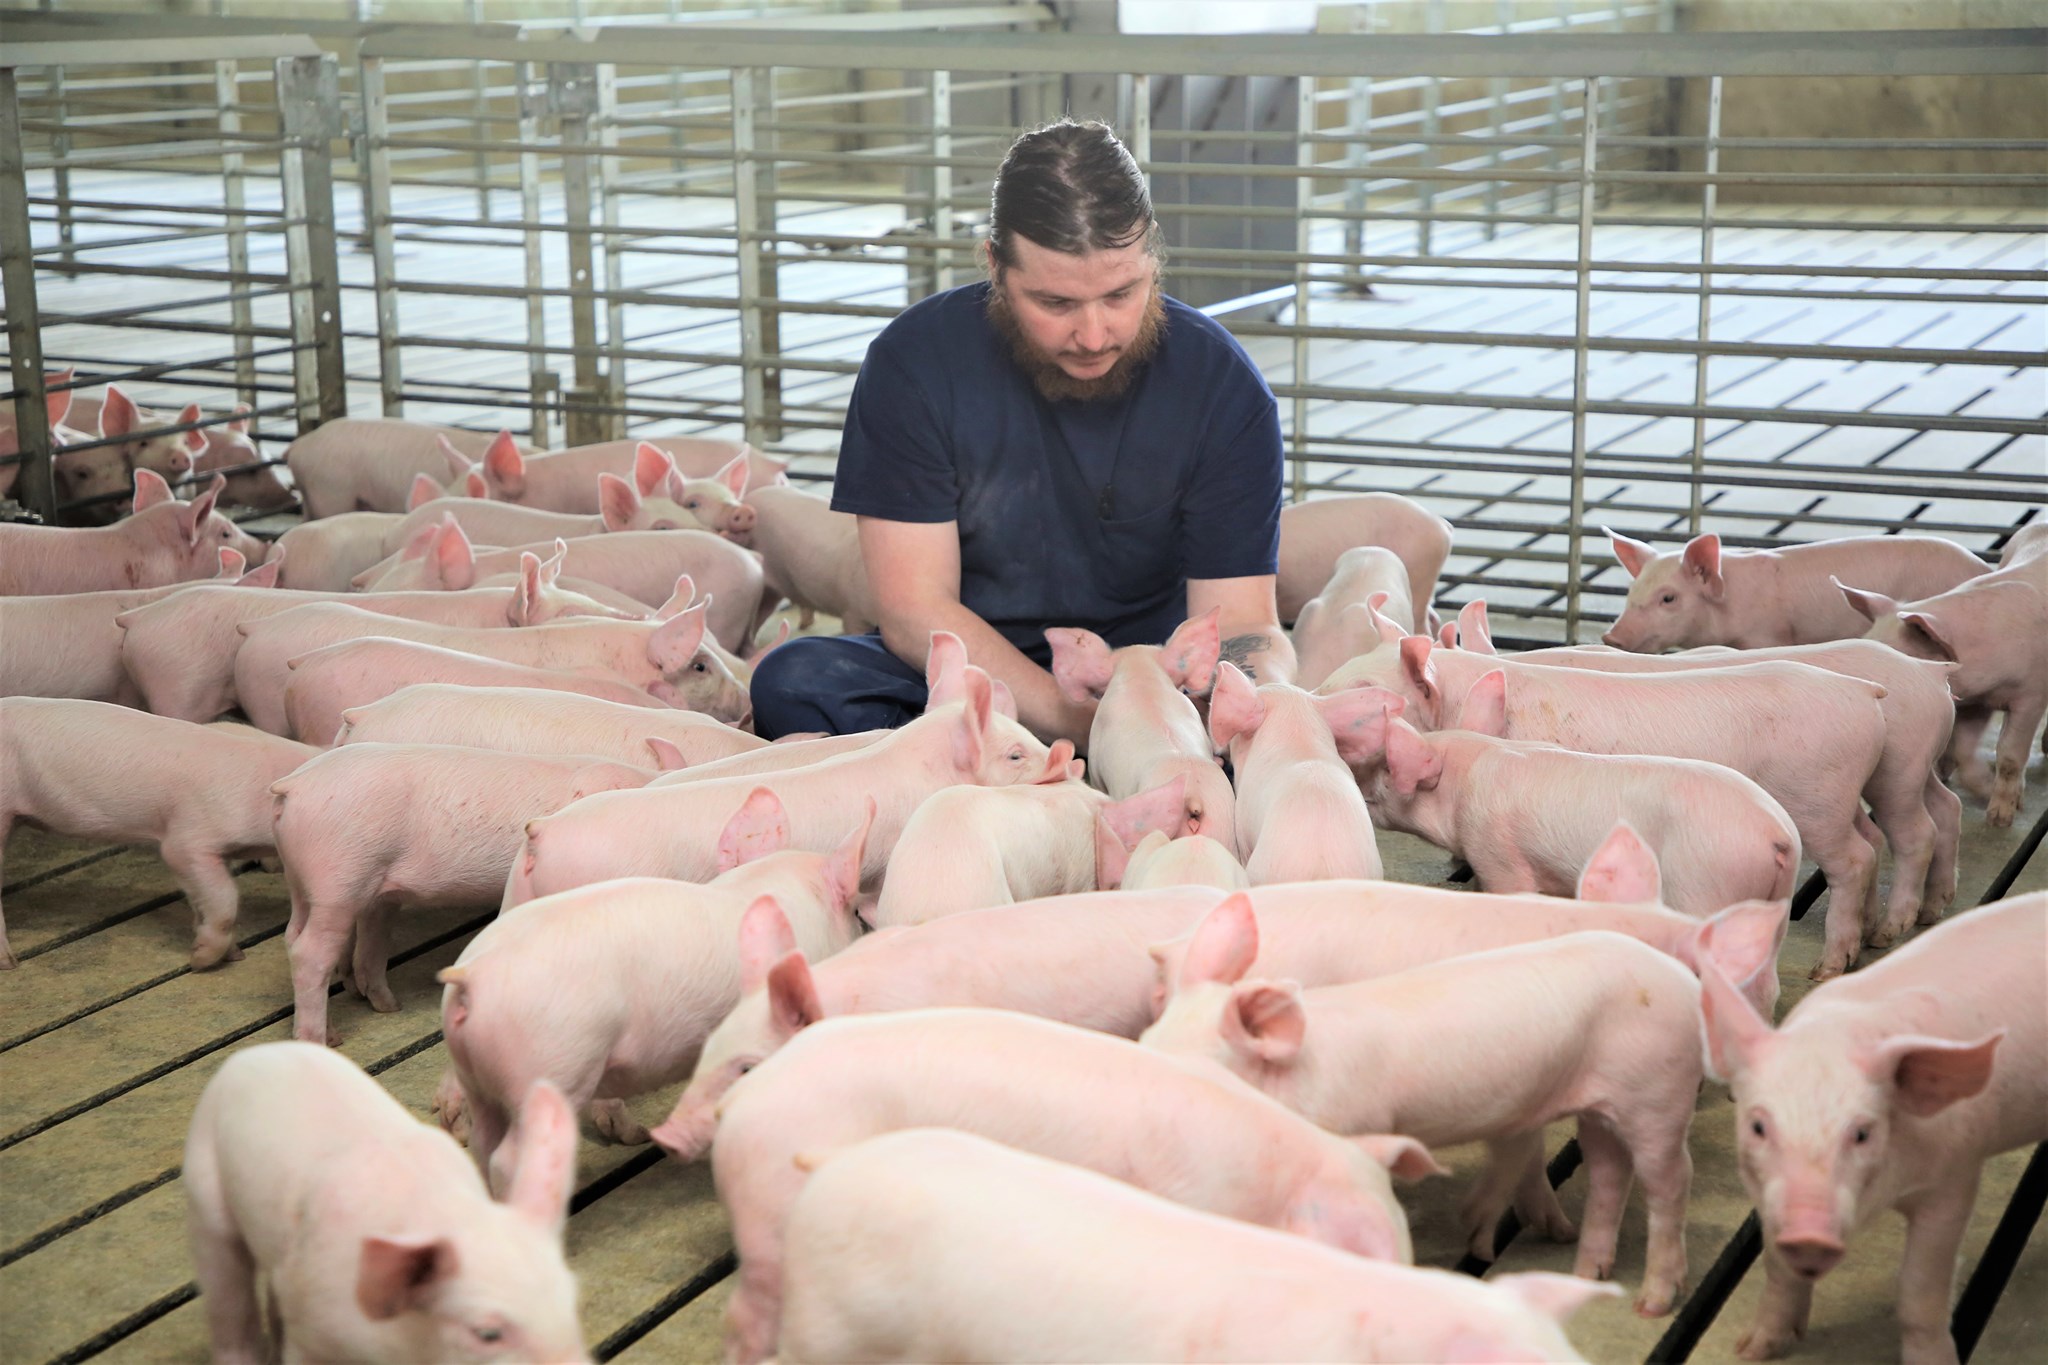 Cody inspects a group of pigs.